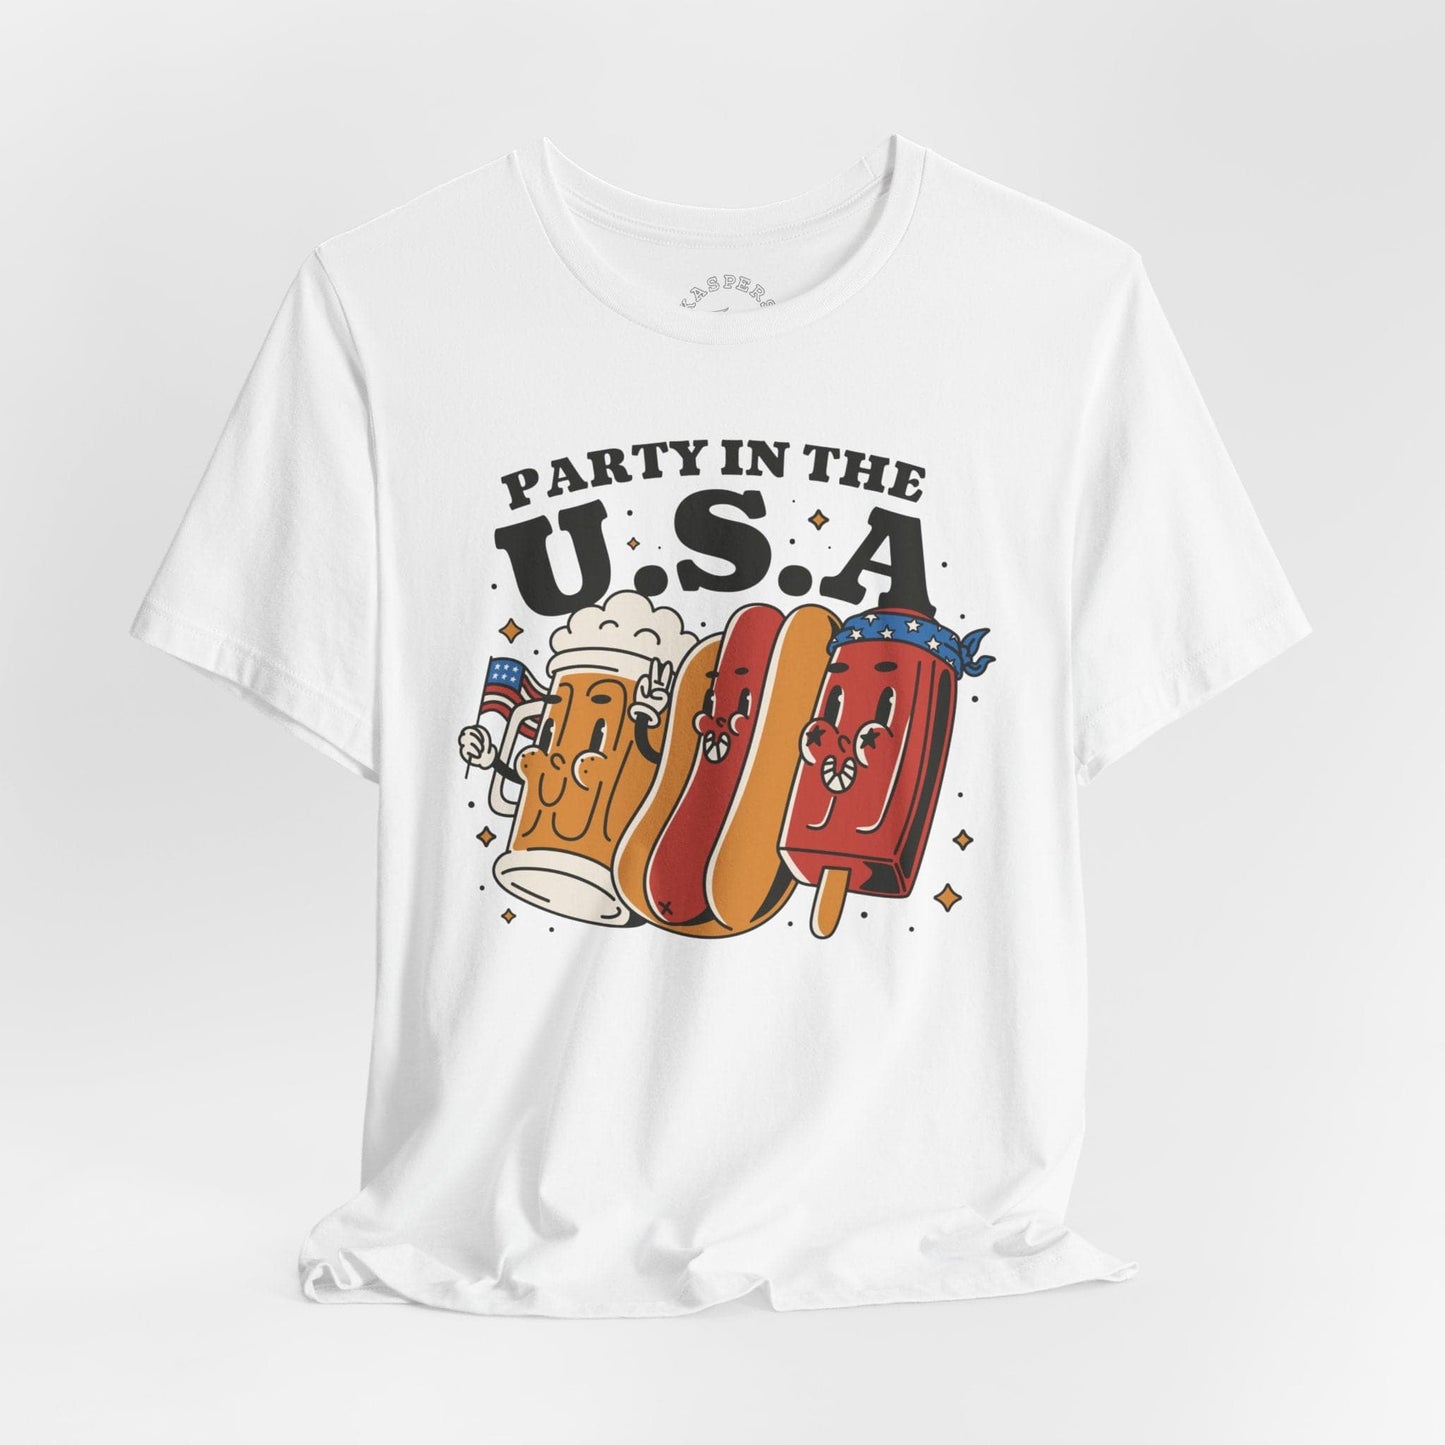 Party In The U.S.A T-Shirt